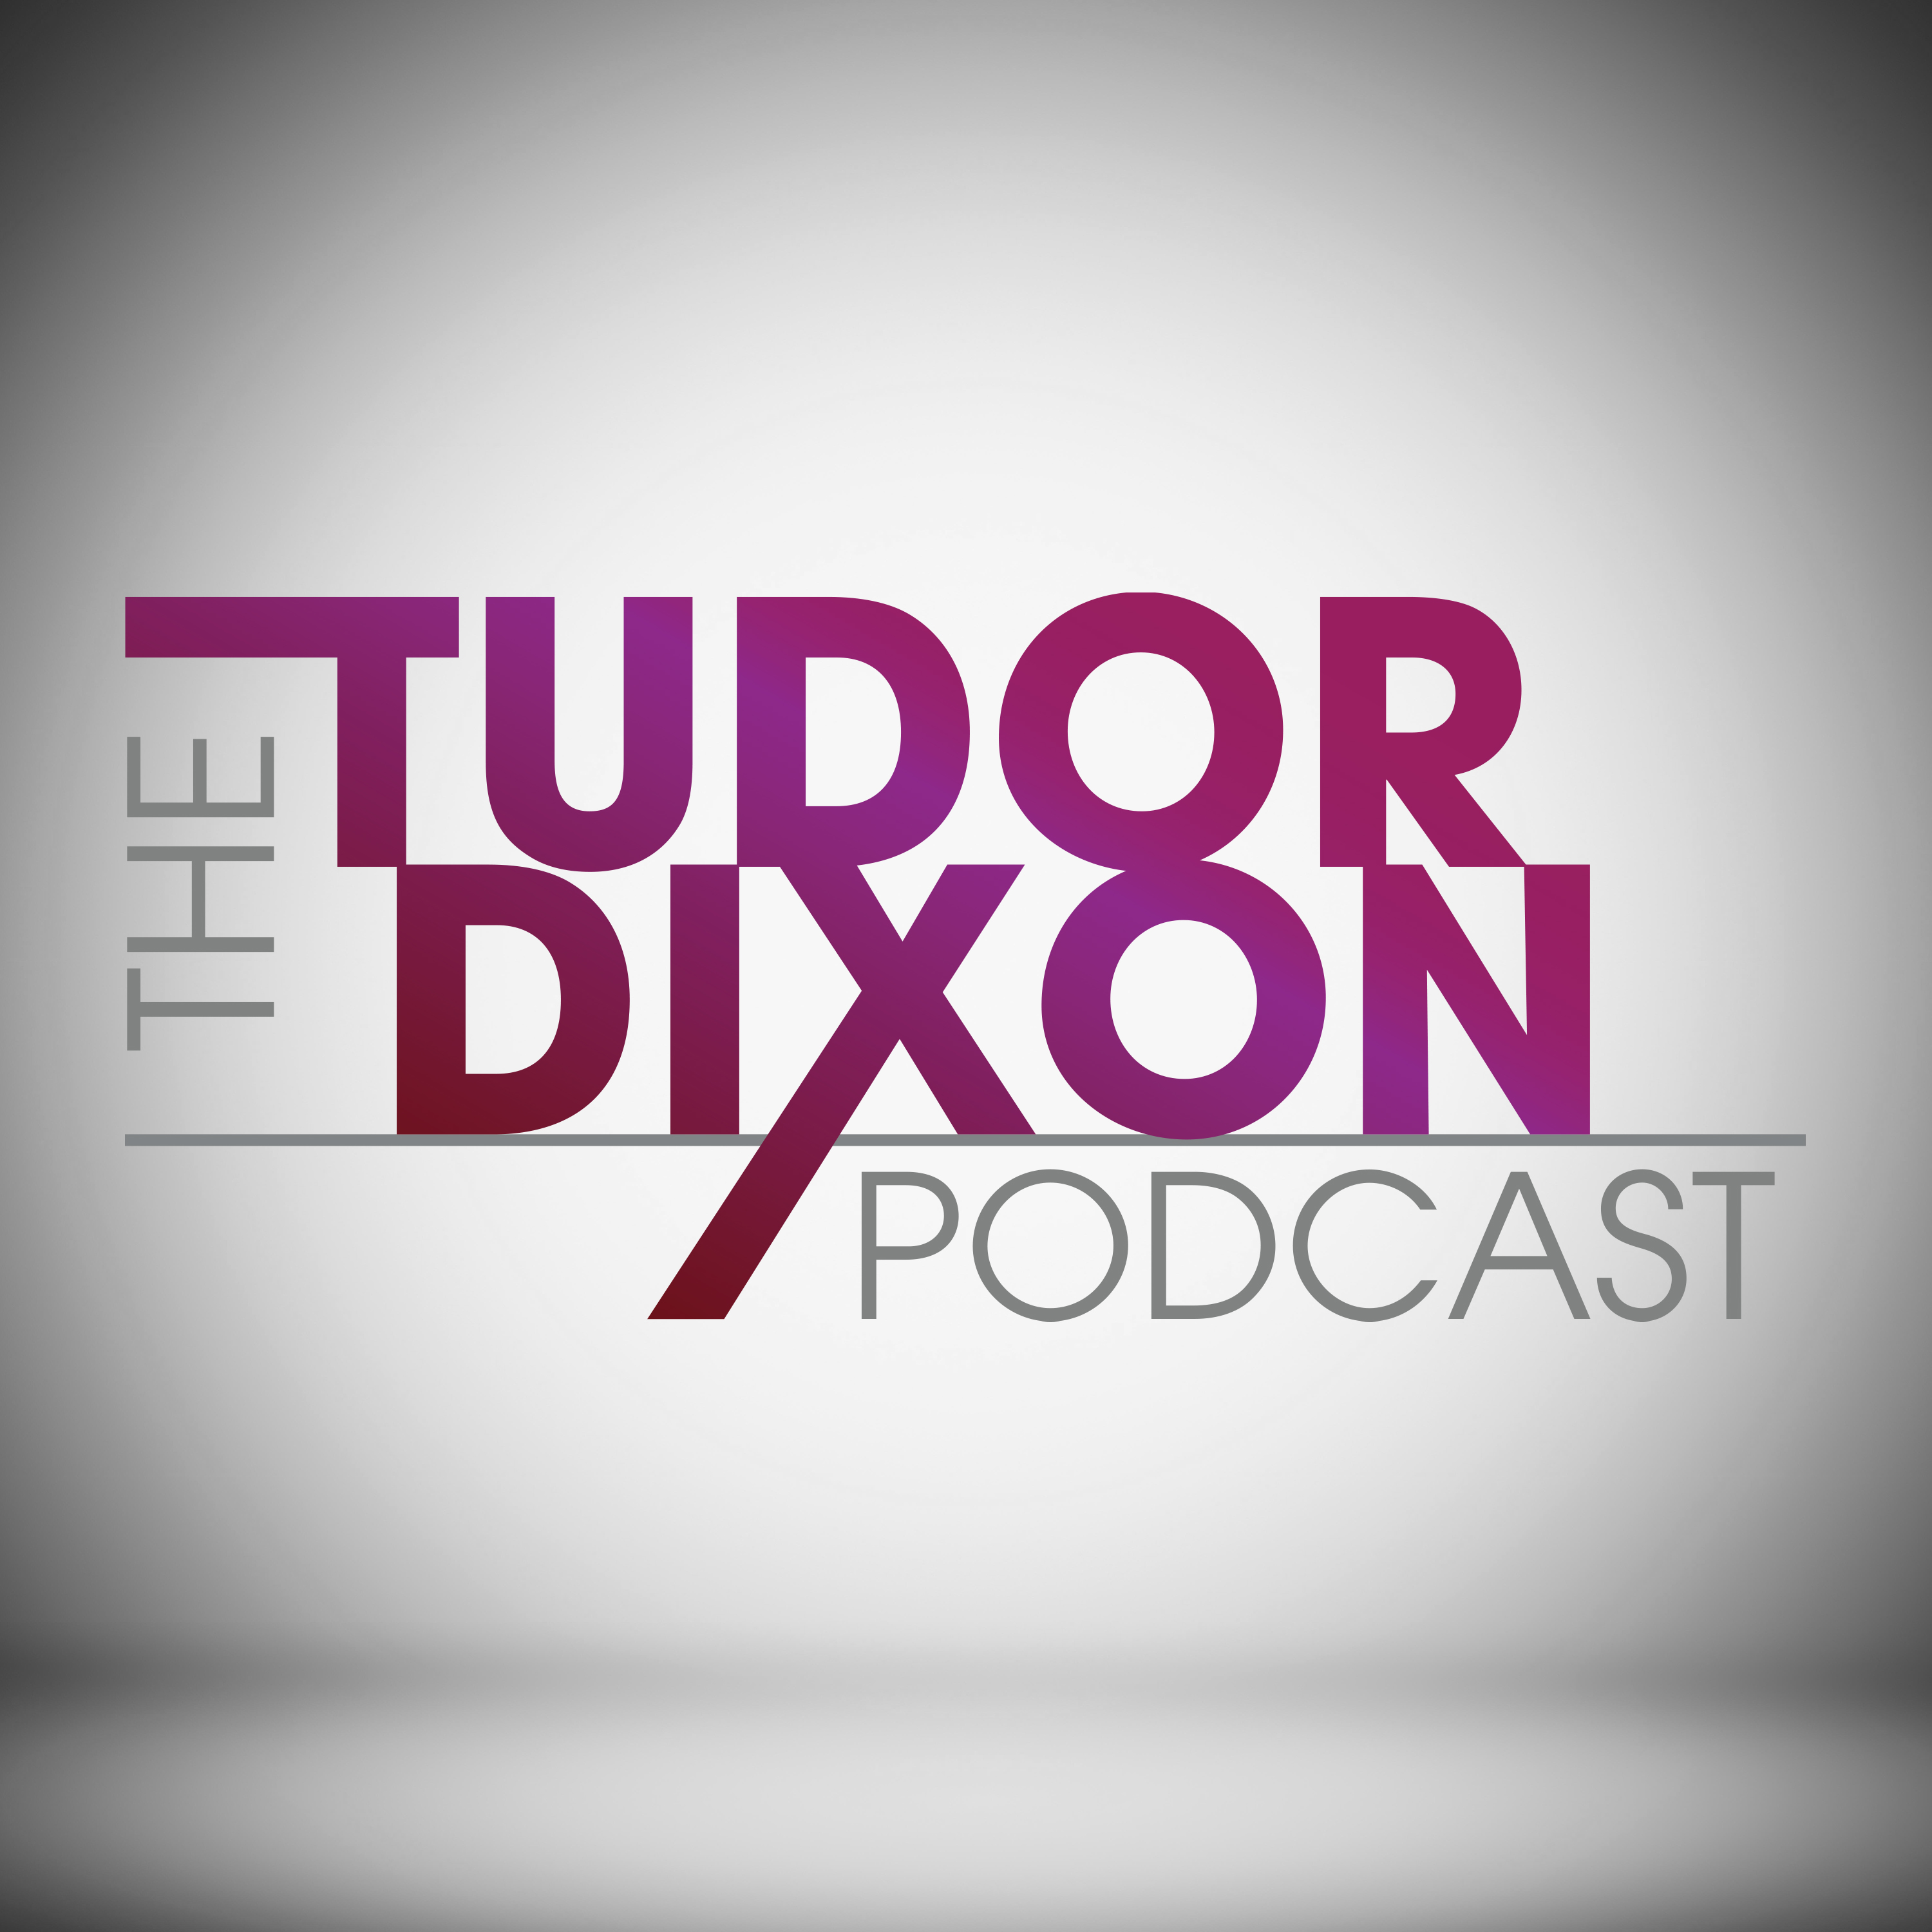 The Tudor Dixon Podcast: How to Protect Your Children from a Sex Crazed Society